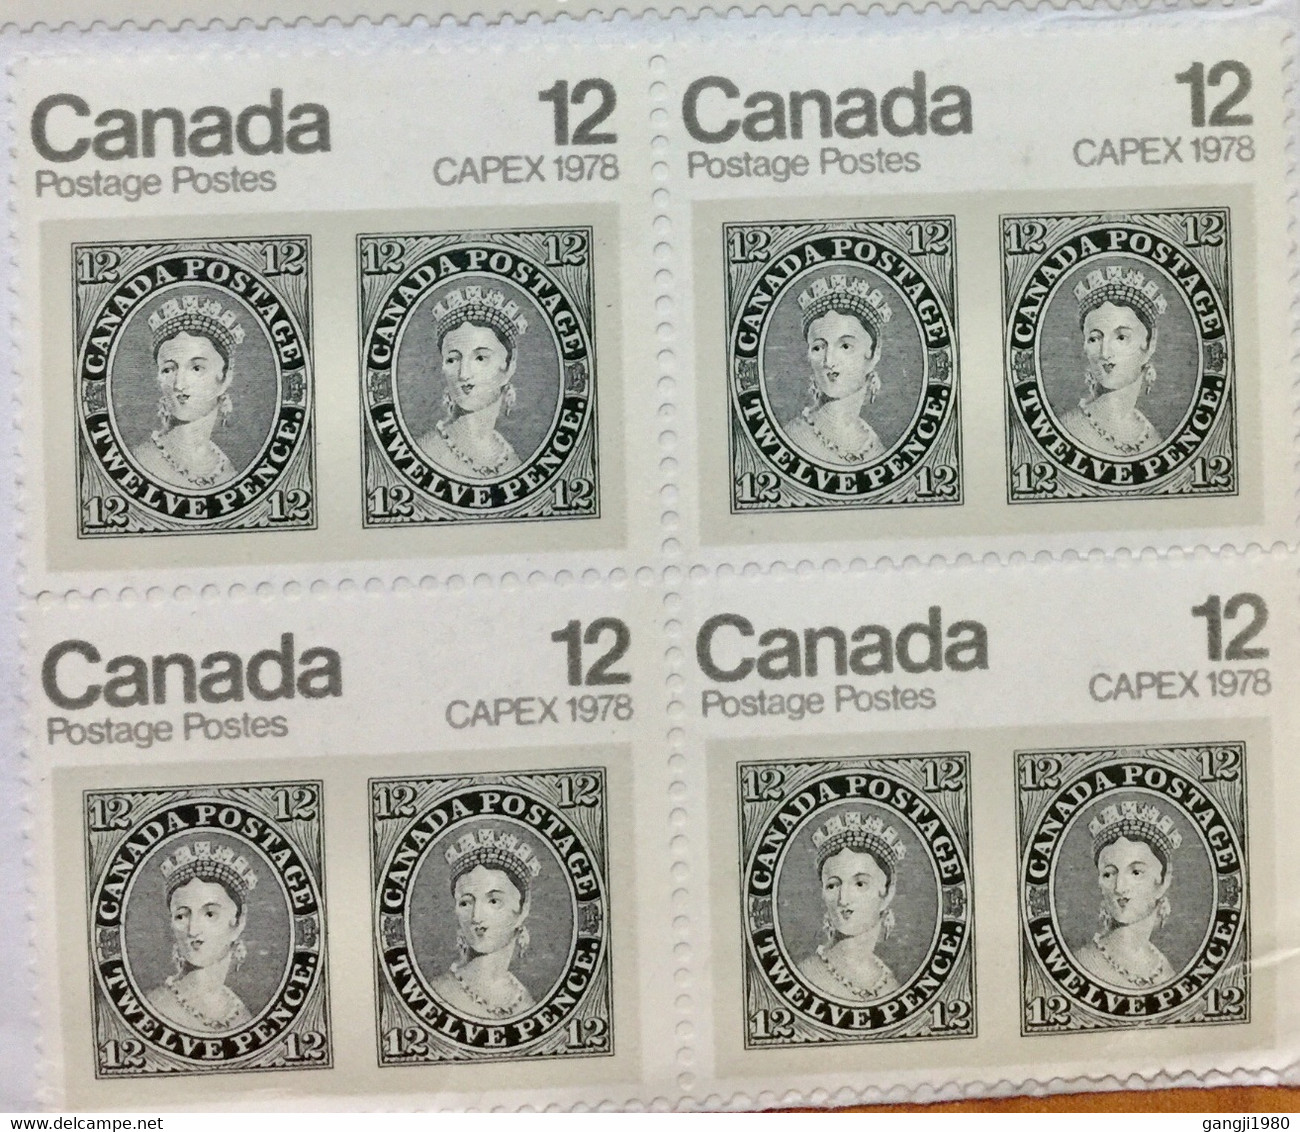 CANADA 2020, CORONA VIROES PERIOD 15 STAMPS ON COVER ALL WITHOUT CANCELLATION,ART PAINTING,NATURE ,LEOPARD,ANIMAL,QUEEN, - Brieven En Documenten